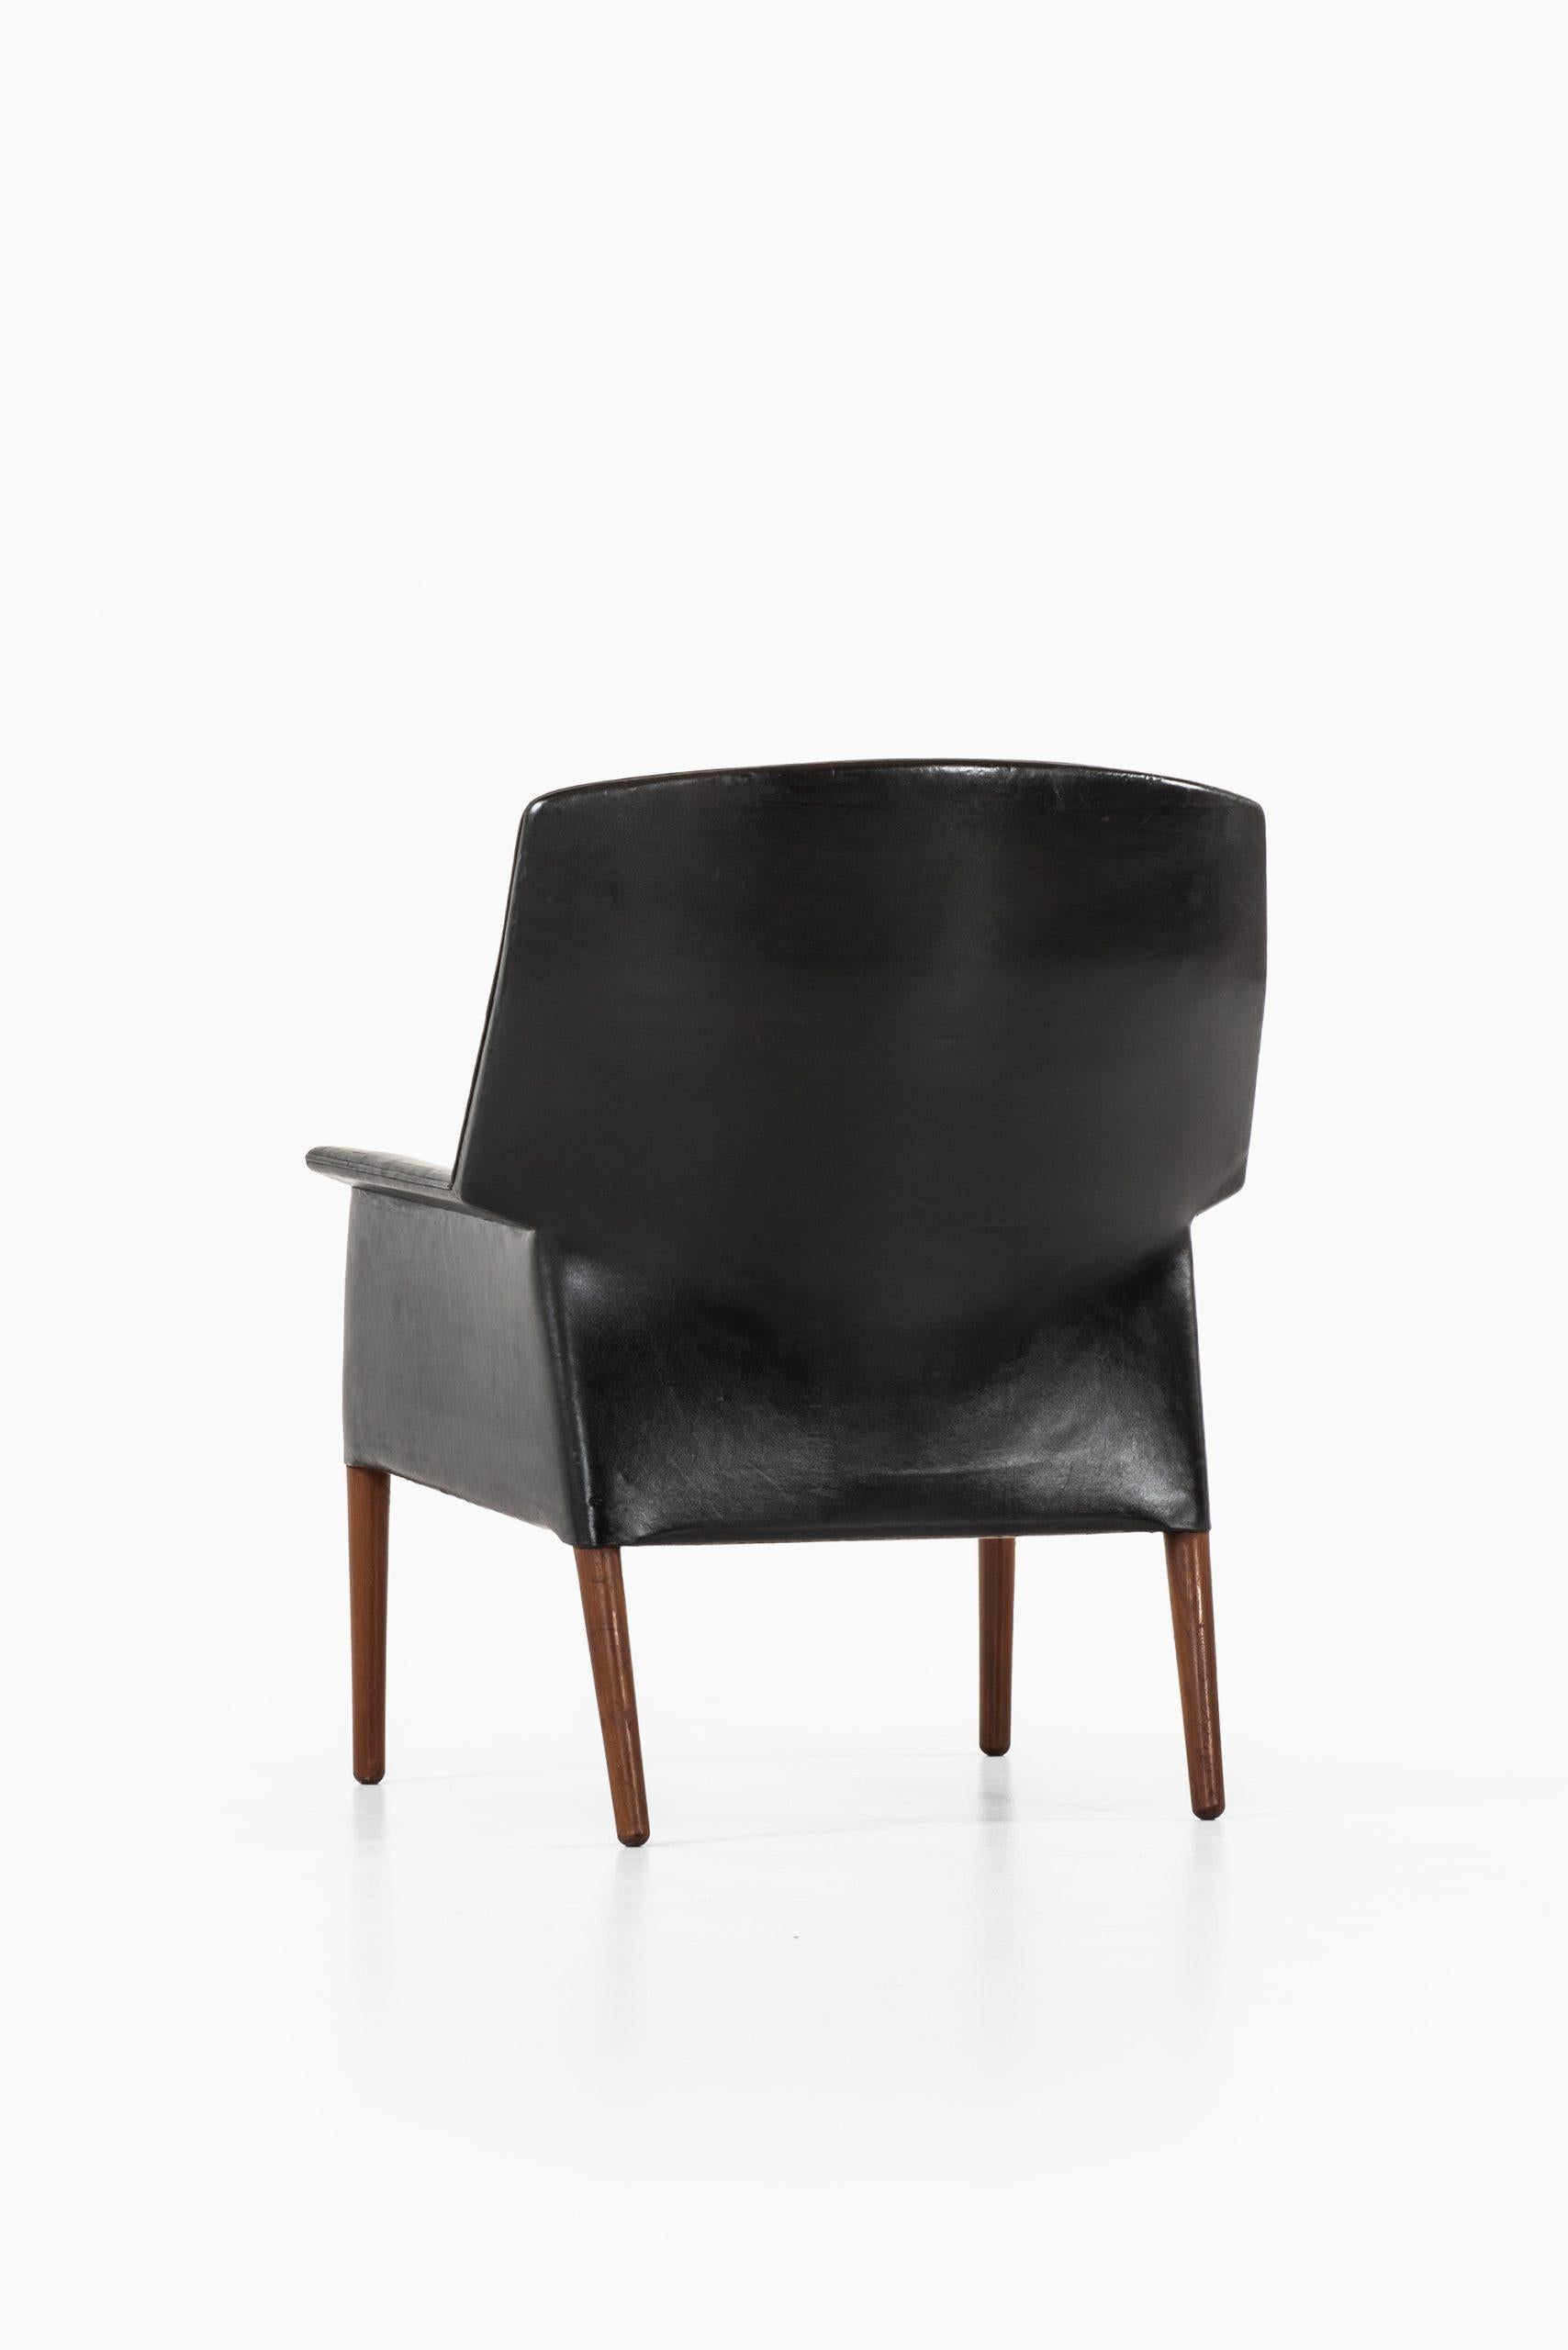 Leather Aksel Bender Madsen & Ejner Larsen Easy Chair by Cabinetmaker Willy Beck For Sale